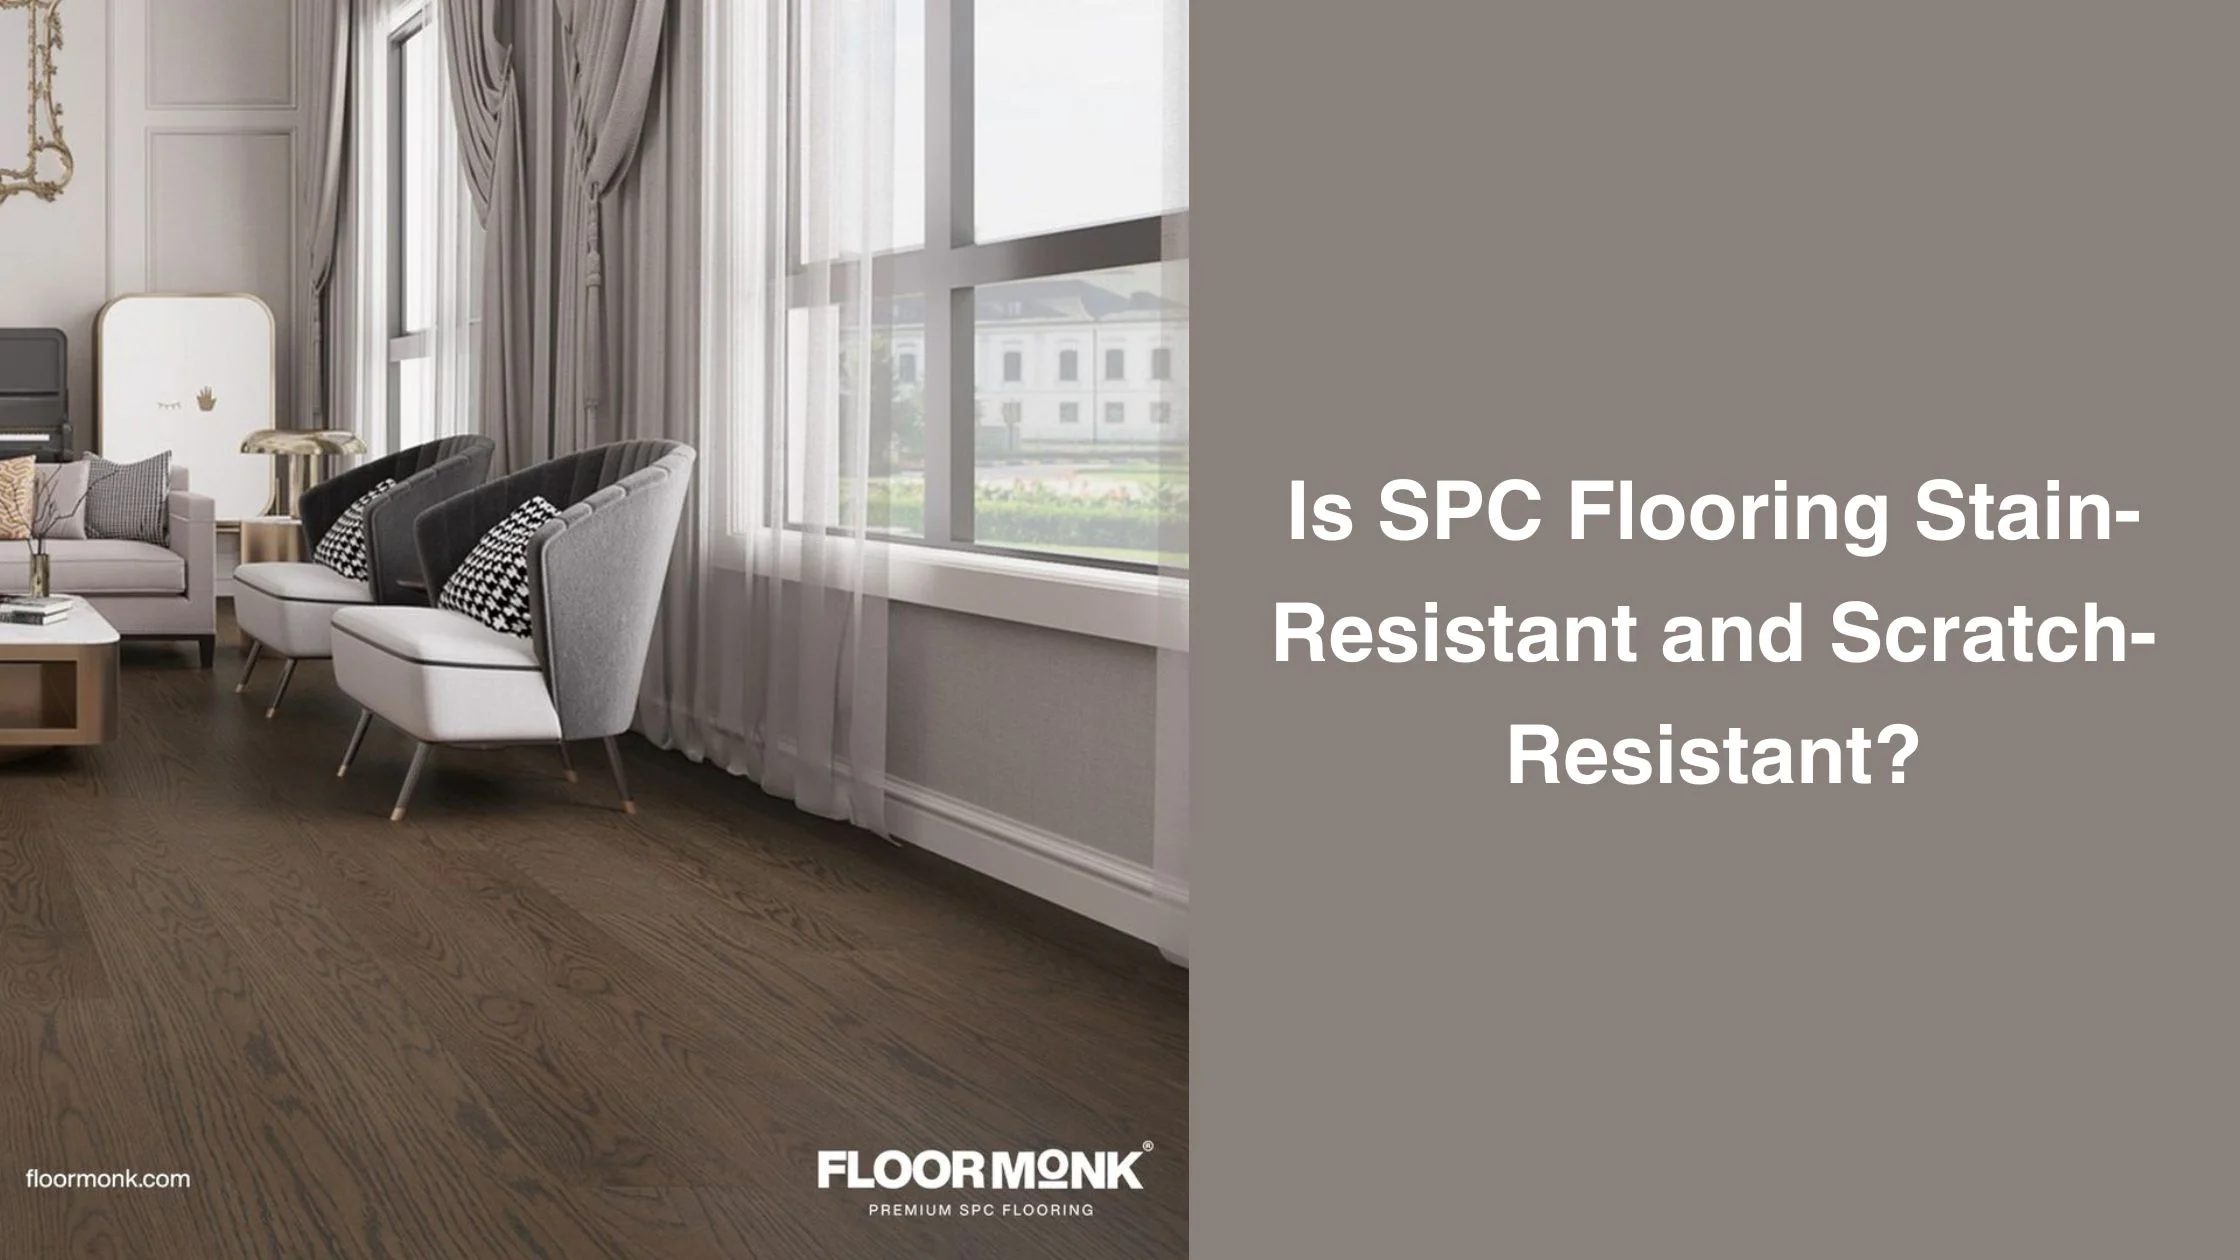 Is SPC Flooring Stain-Resistant And Scratch-Resistant?